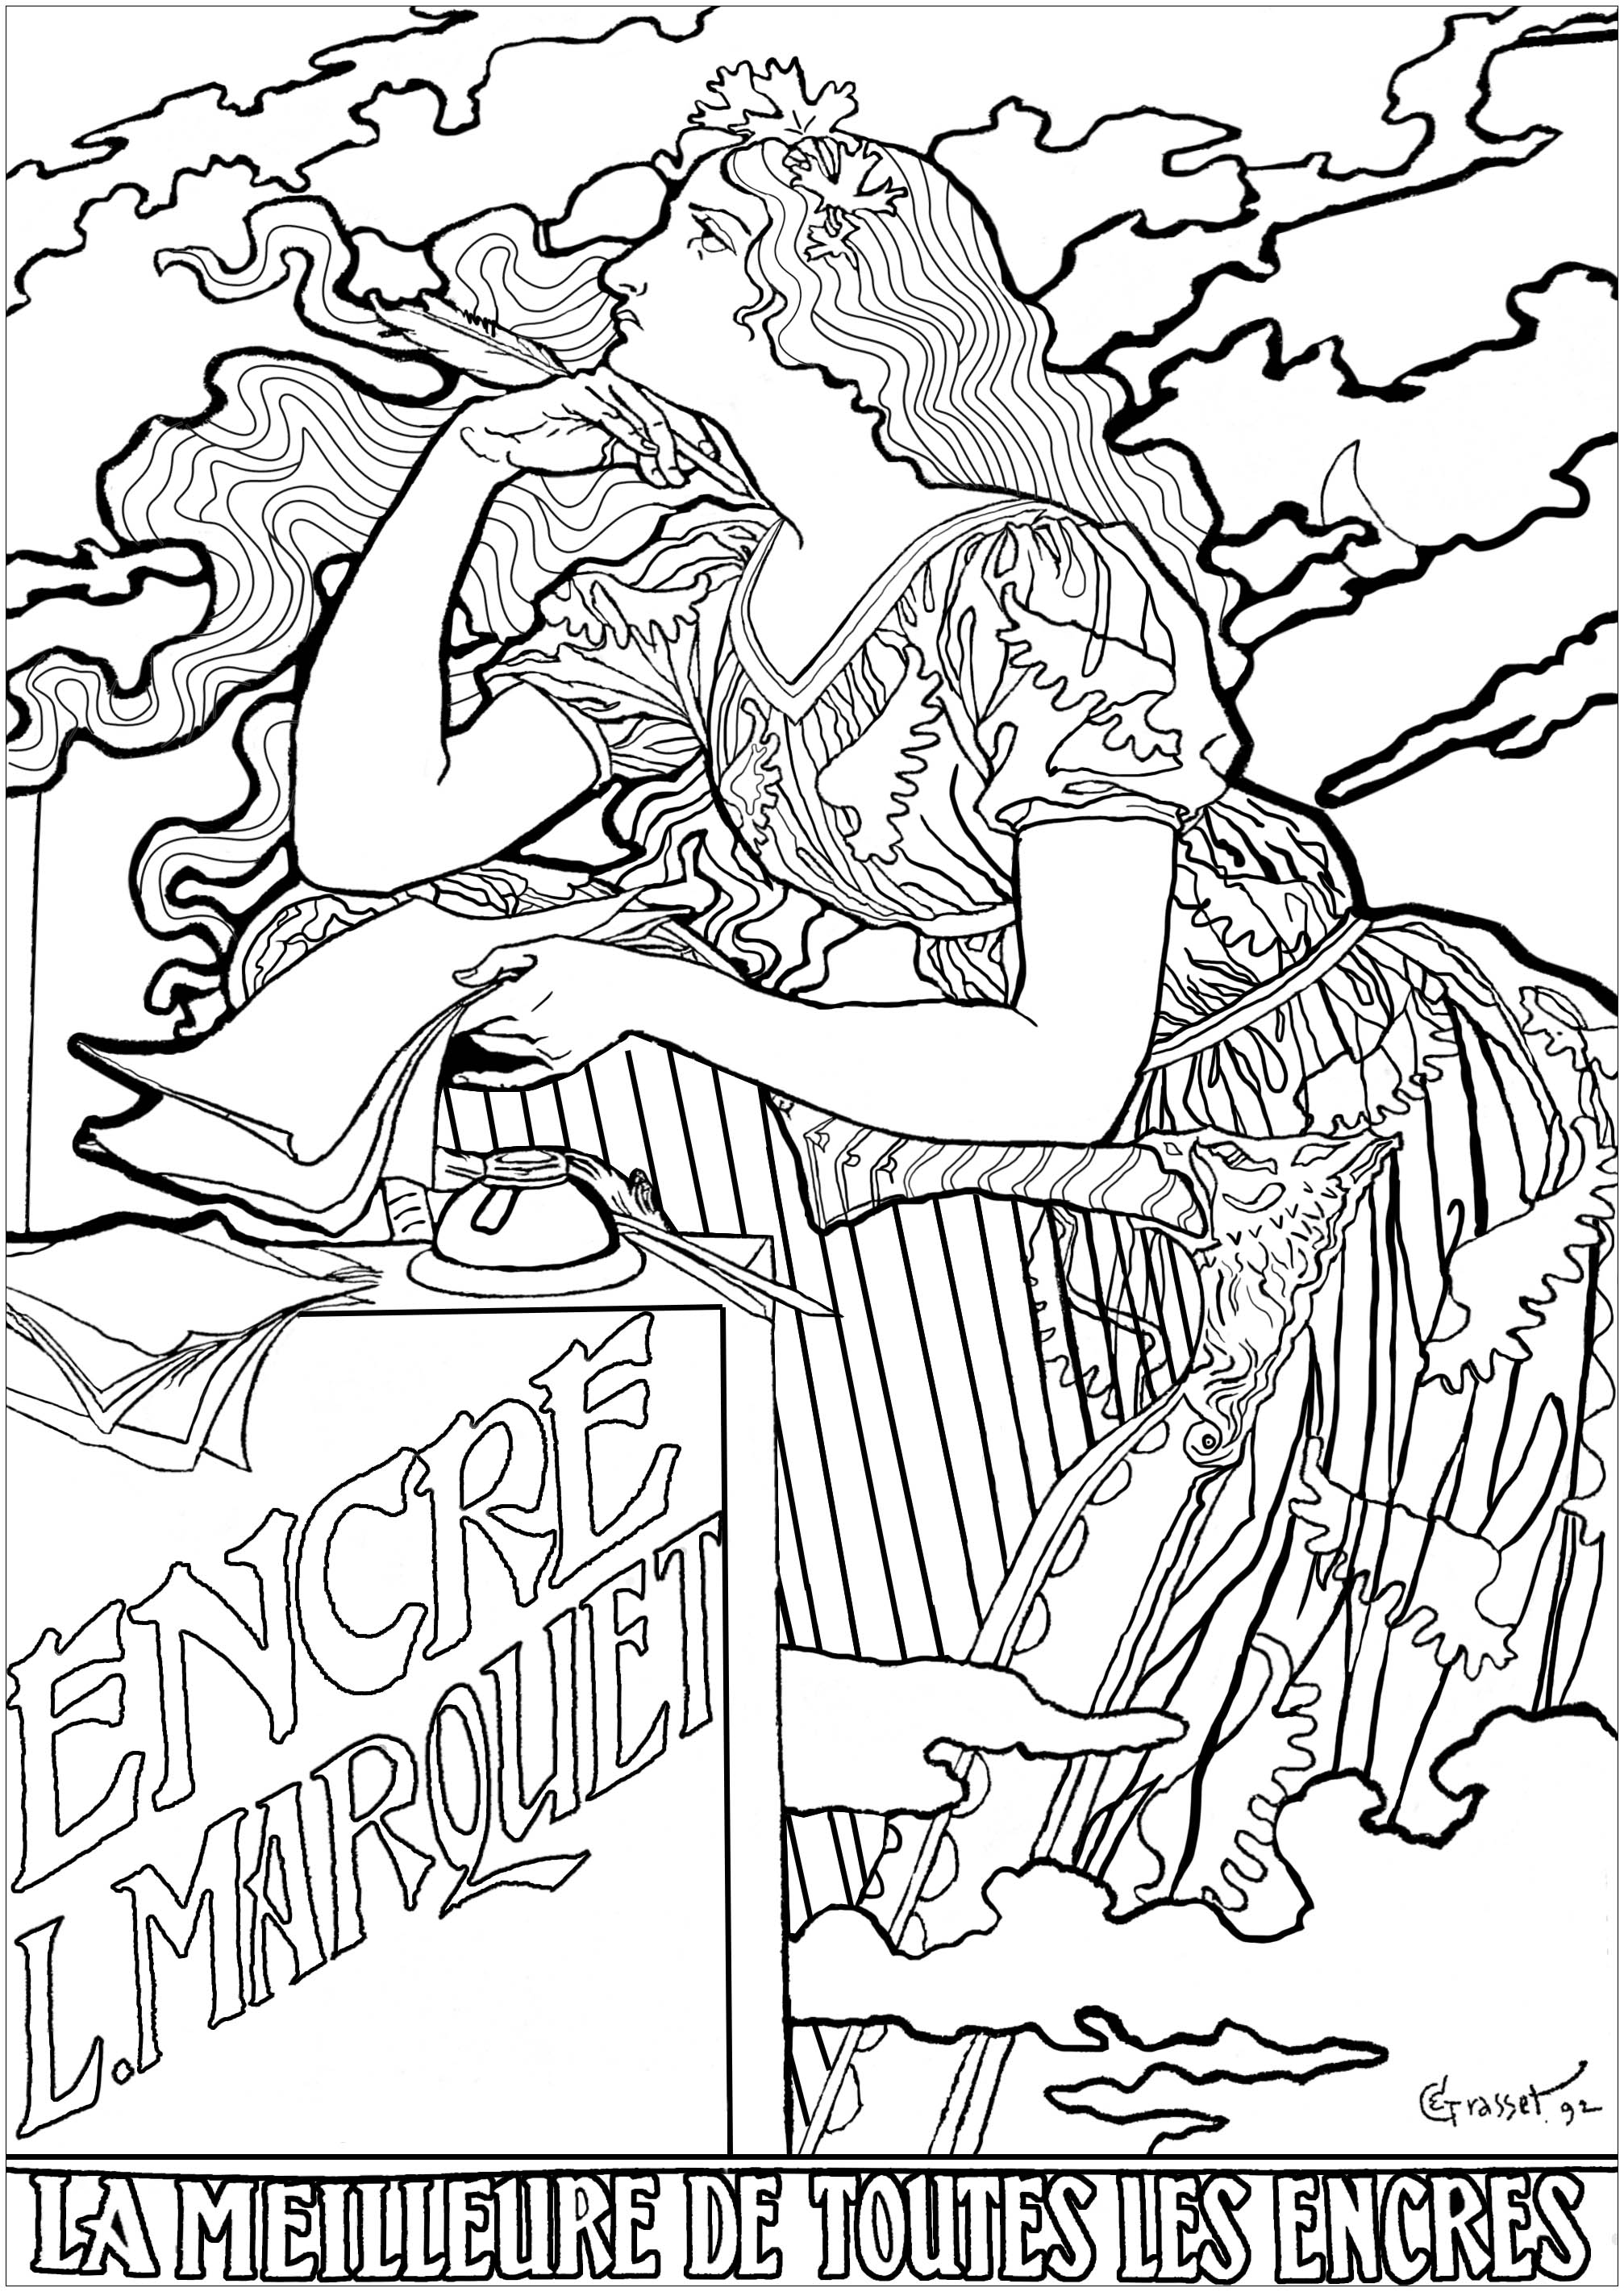 Eugène Grasset: Poster for L. Marquet inks. This coloring page is based on an advertising poster from 1892, created by Eugène Grasset for a brand of ink and highly representative of the Art Nouveau style, Artist : Olivier